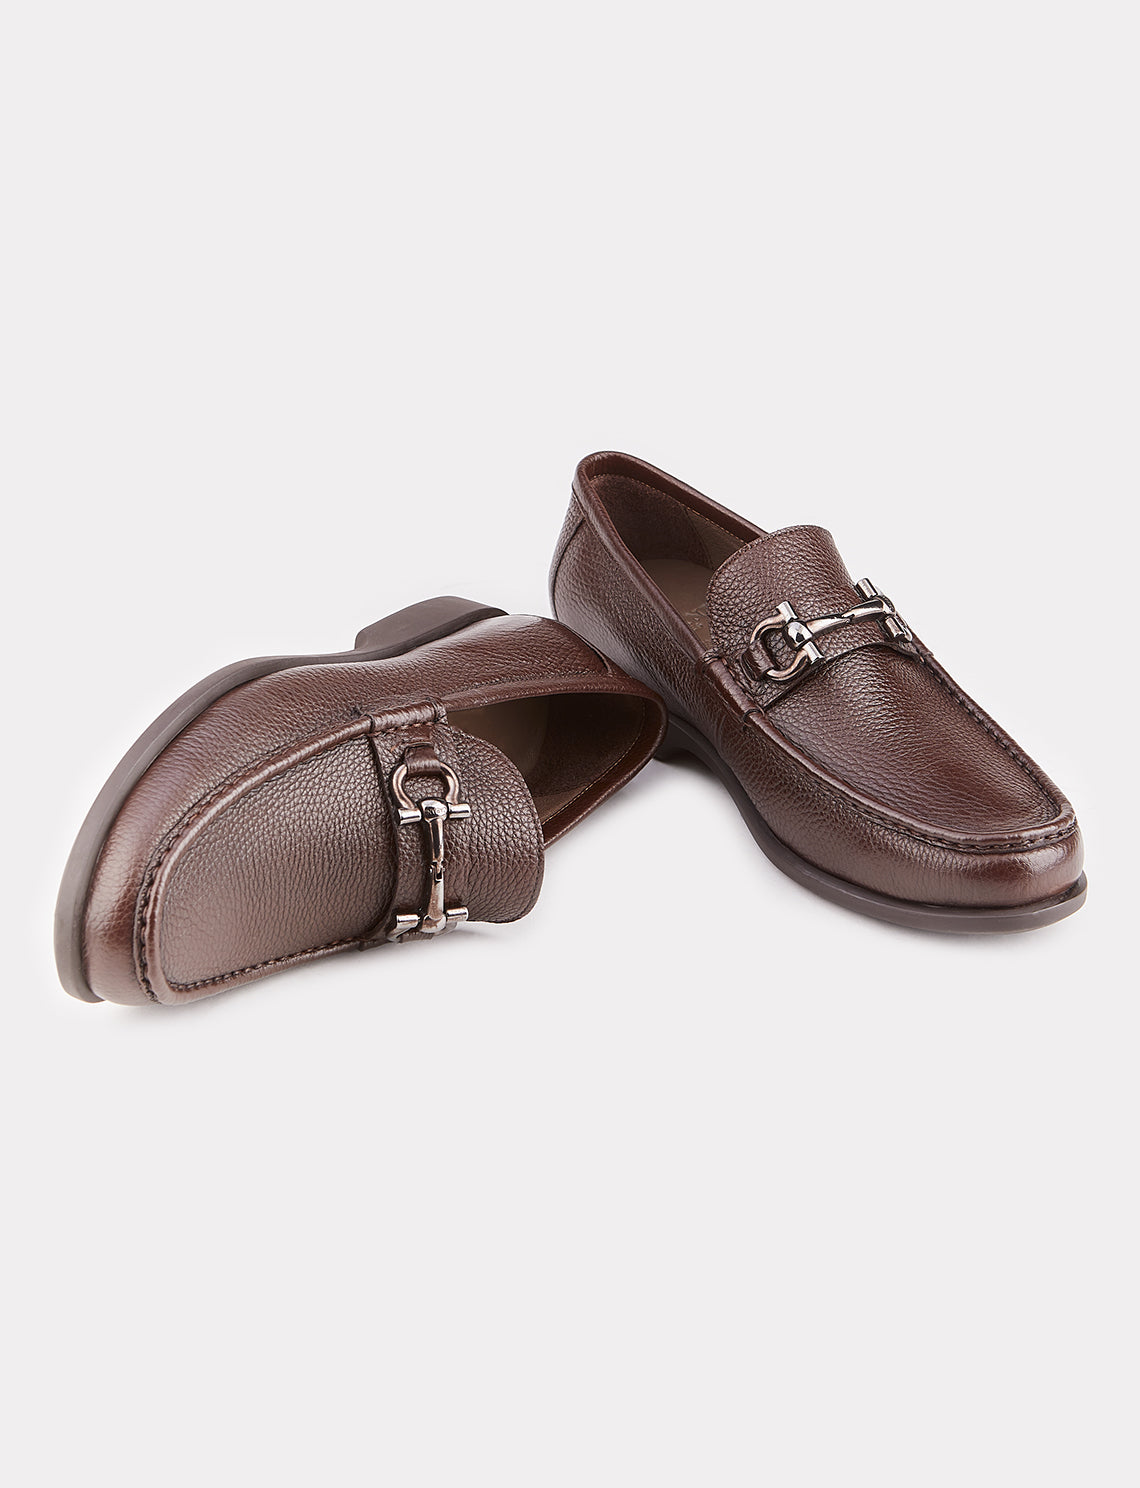 Men Brown Genuine Leather Metal Decor Loafers